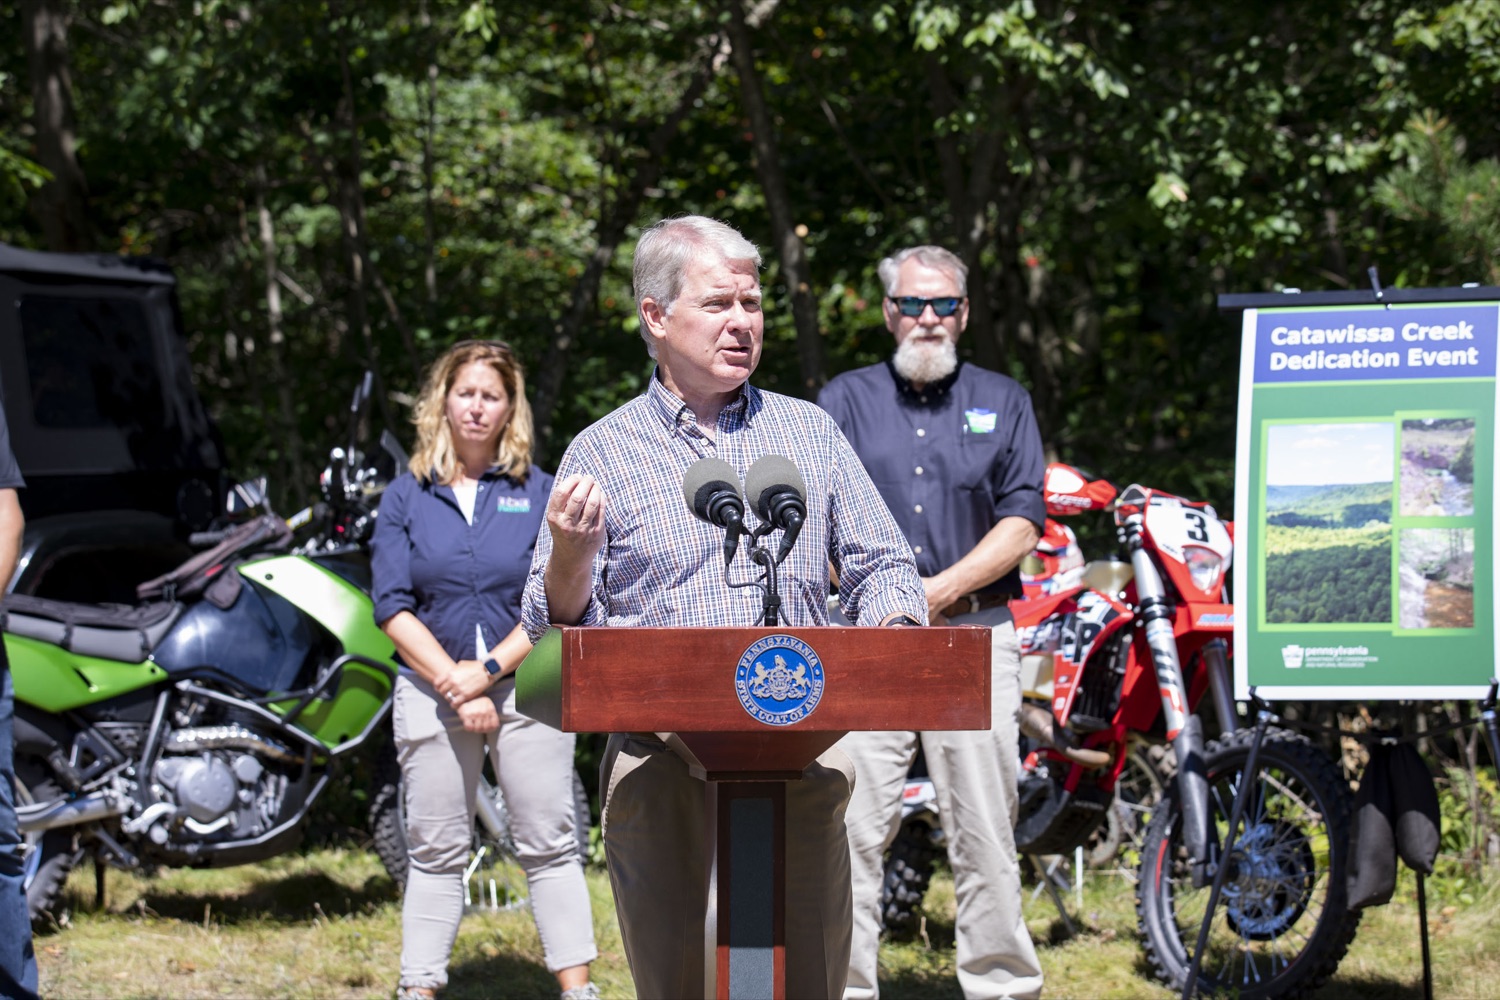 Senator David Argall discusses the acquisition of a 5,600-acre tract of land that will be developed into a new motorized recreation area, in McAdoo, PA on August 12, 2022.<br><a href="https://filesource.amperwave.net/commonwealthofpa/photo/22090_dcnr_RecreationArea_26.jpg" target="_blank">⇣ Download Photo</a>